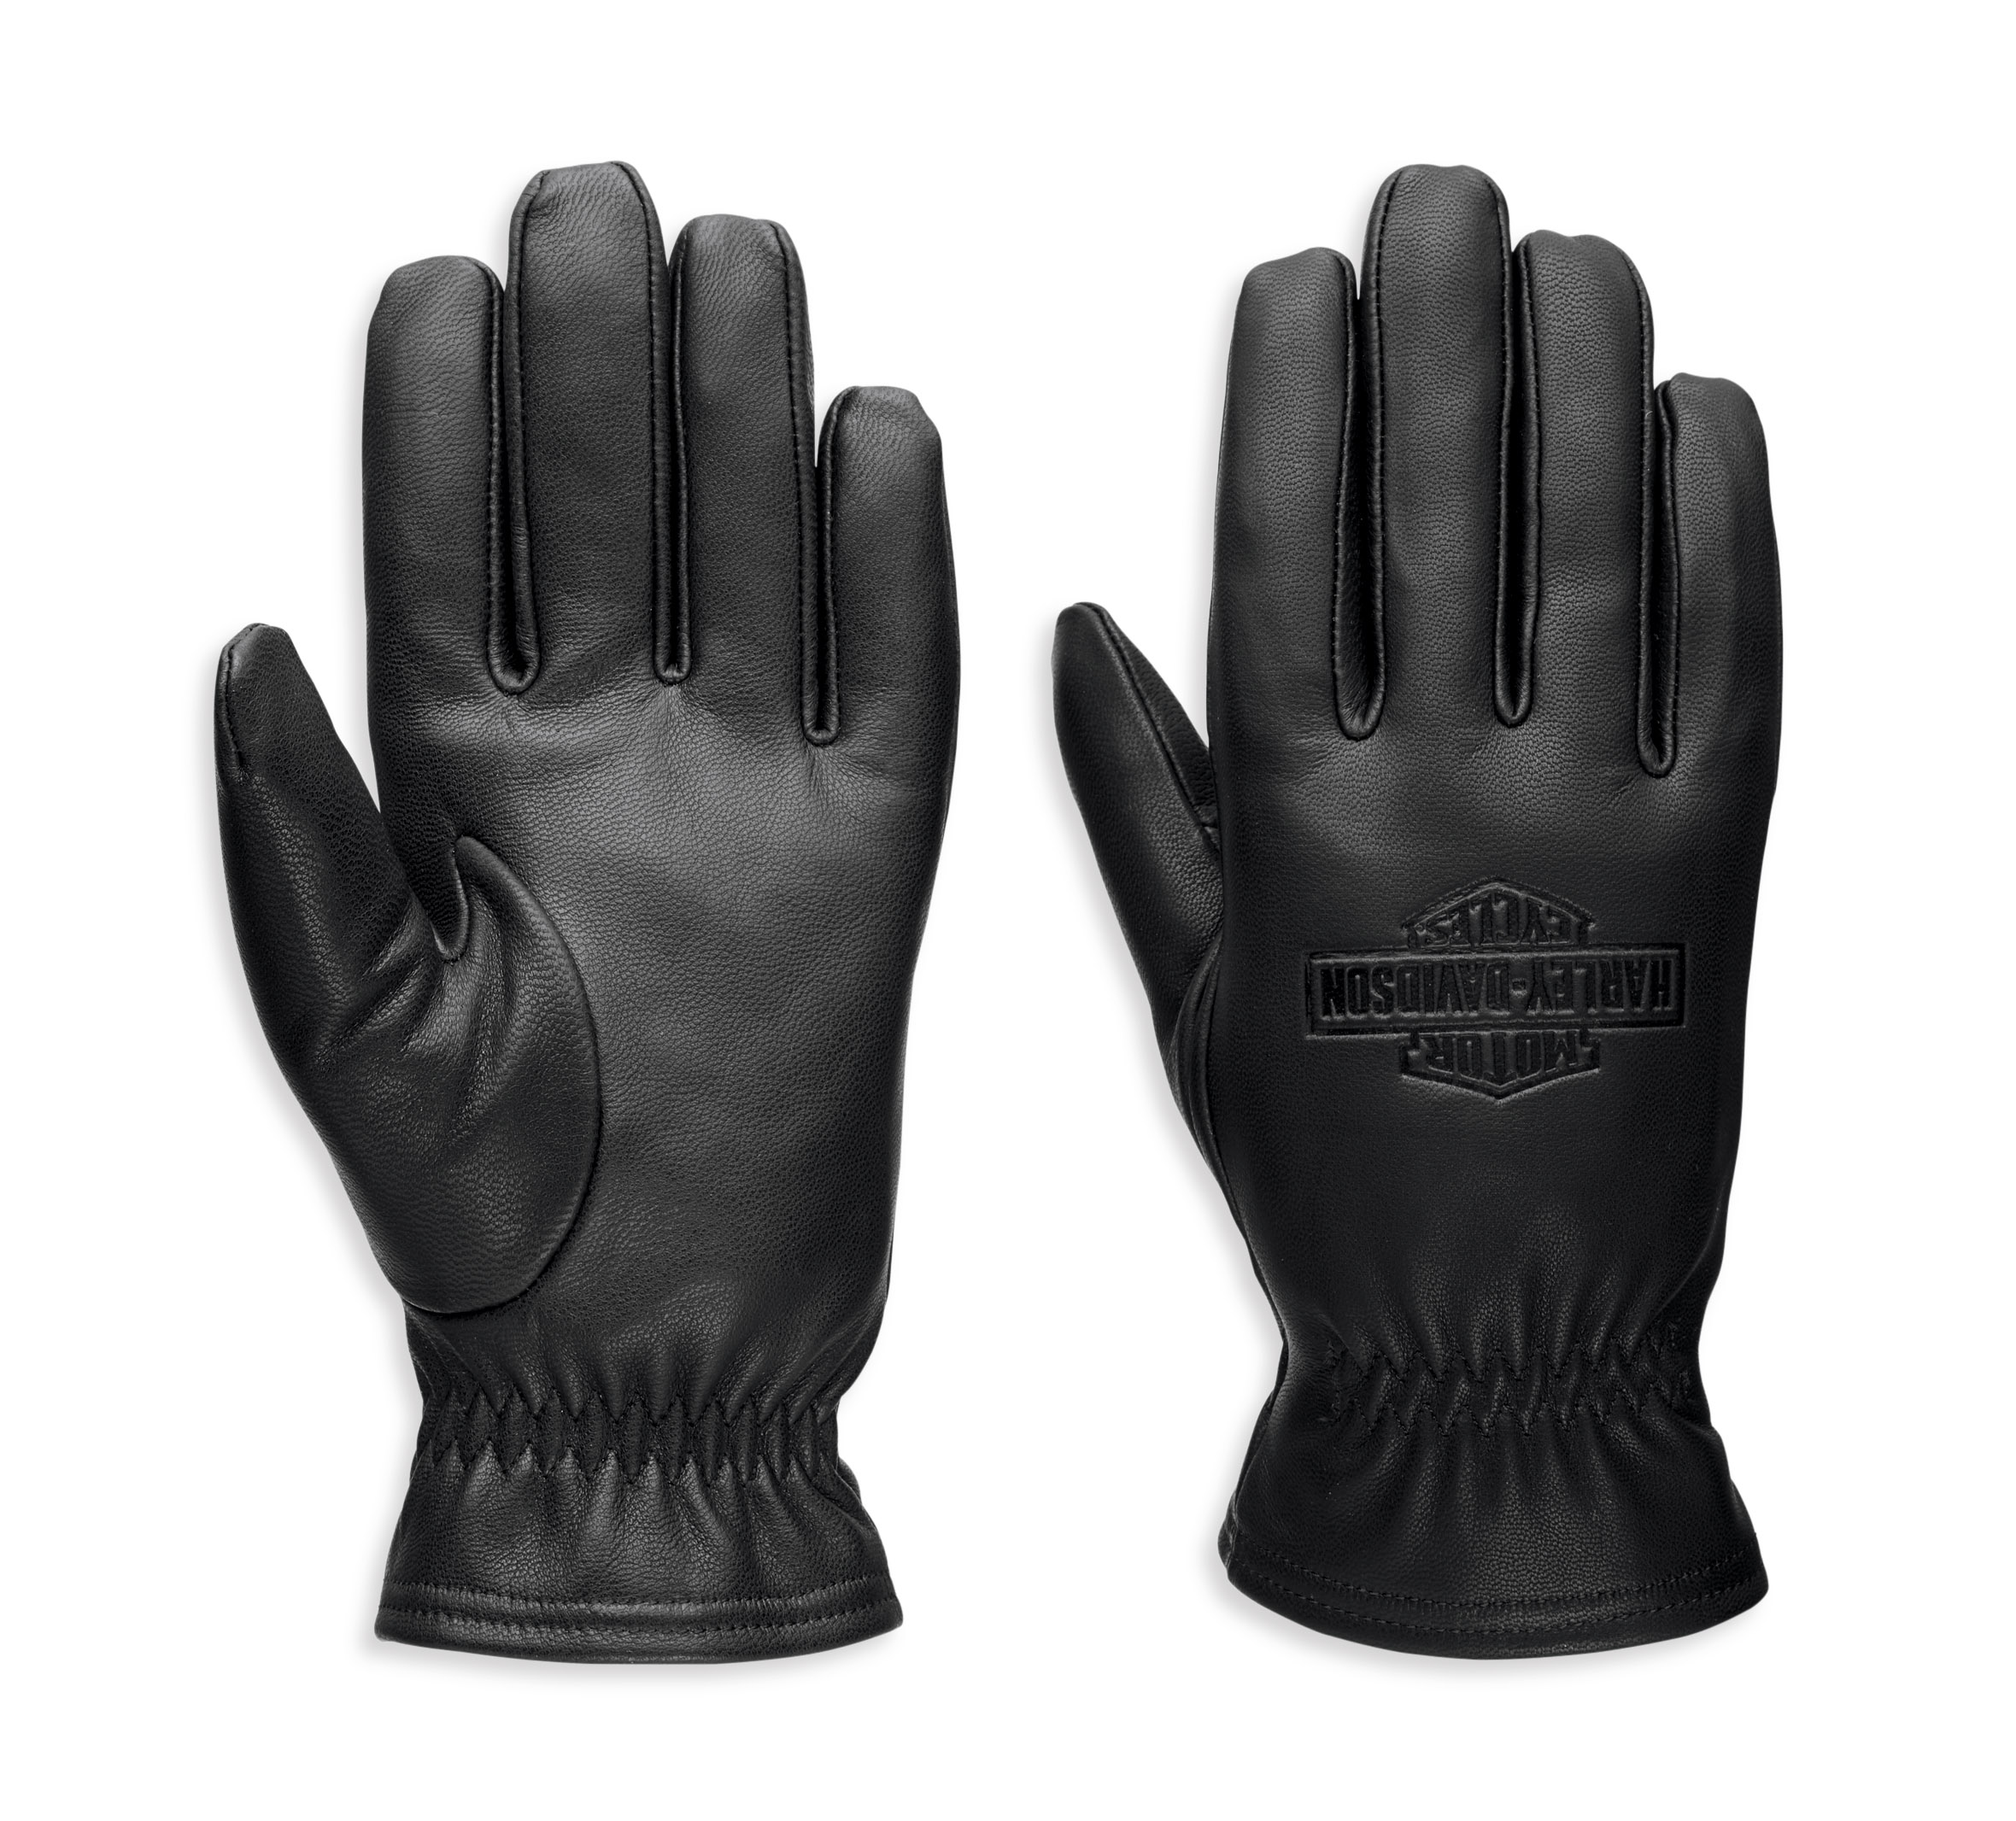 Winter Motorcycle Gloves  A Must For Cold Weather Warriors - Cycle Gear